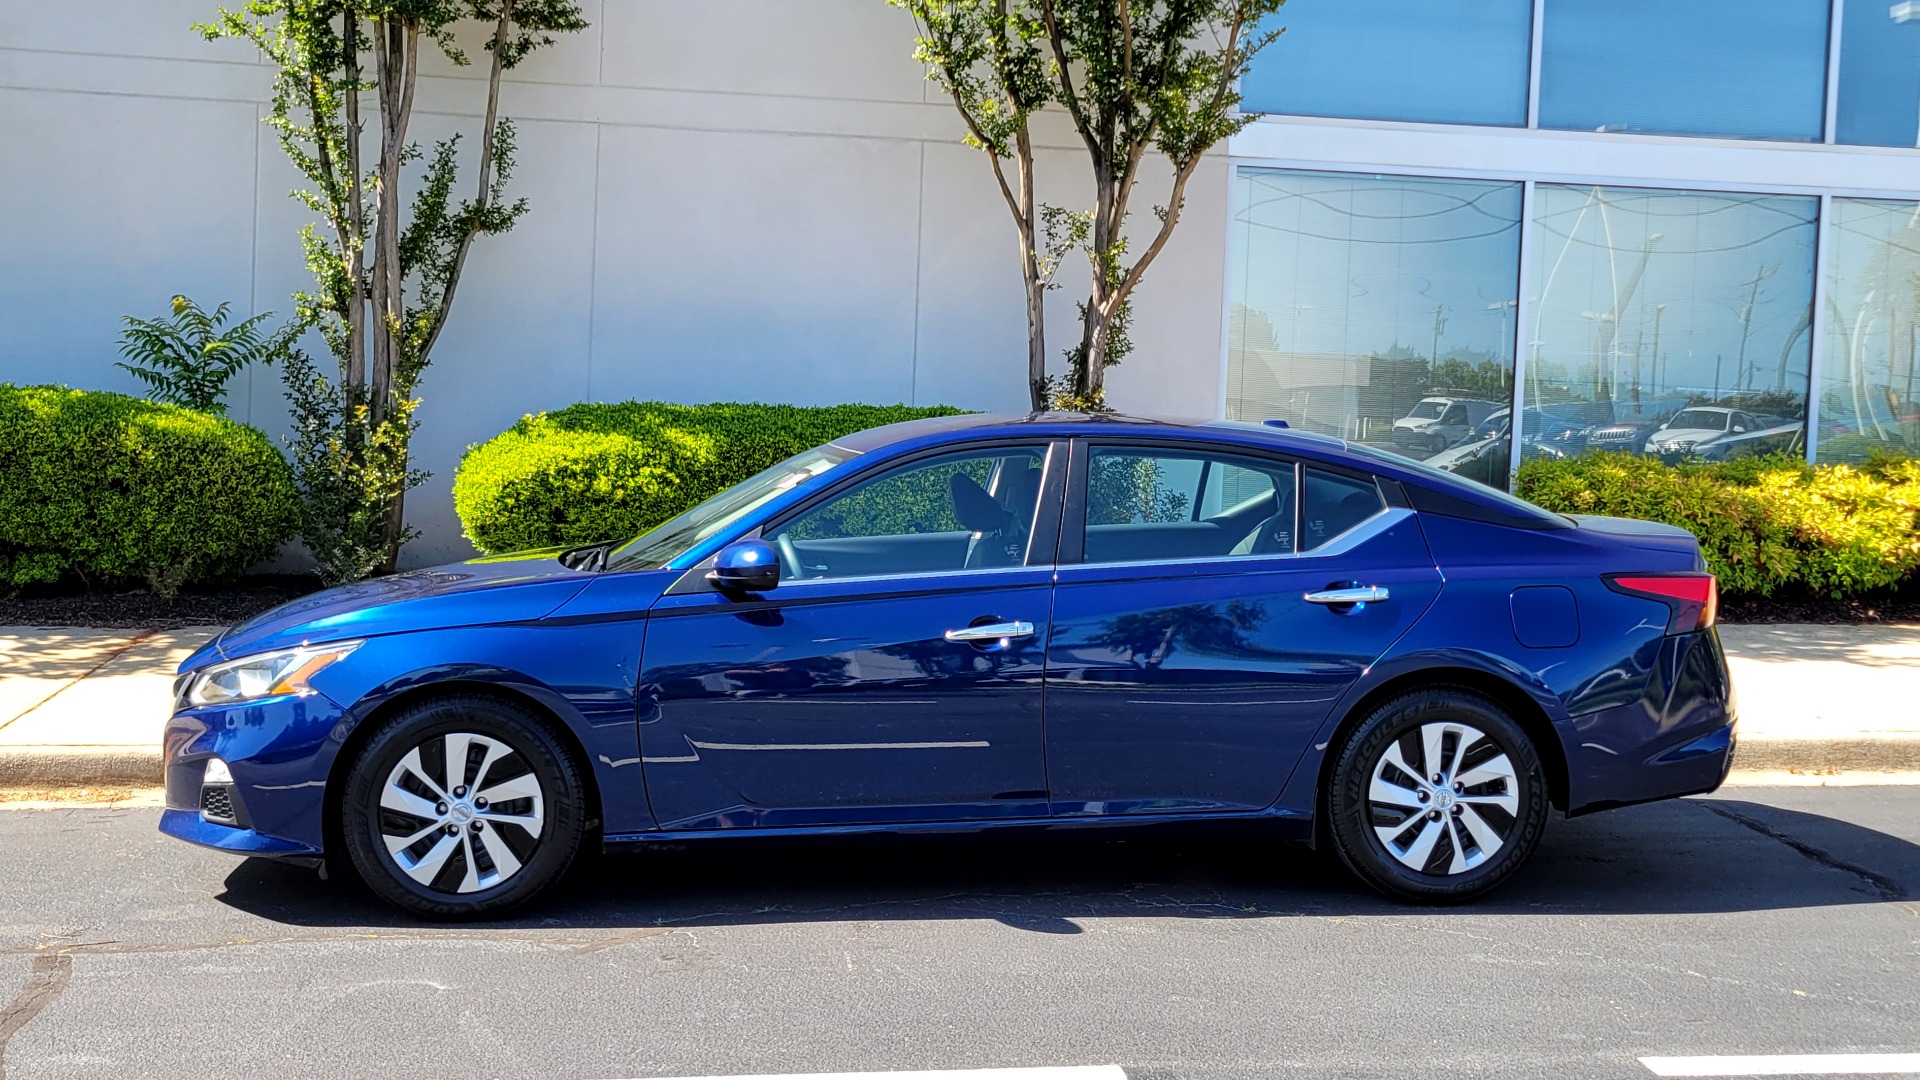 Used 2020 Nissan ALTIMA 2.5 S SEDAN / CVT TRANS / APPLE CARPLAY / REARVIEW for sale $23,995 at Formula Imports in Charlotte NC 28227 3